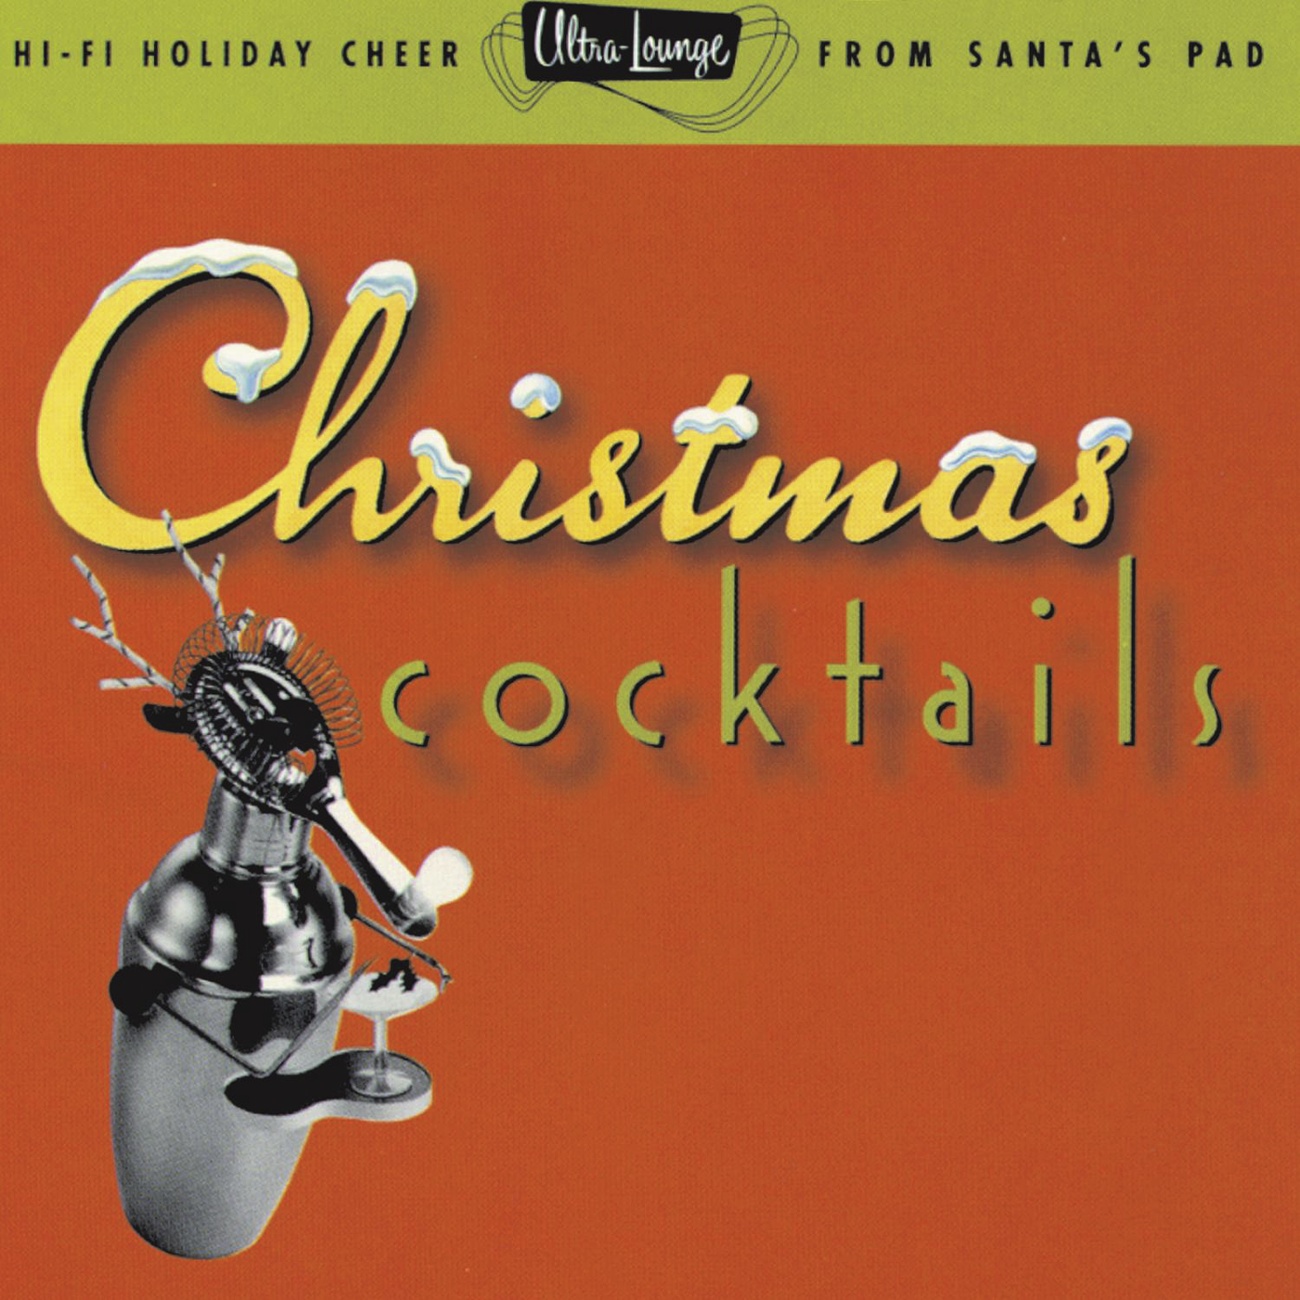 Christmas Trumpets / We Wish You A Very Merry Christmas (Medley) (1996 - Remaster)